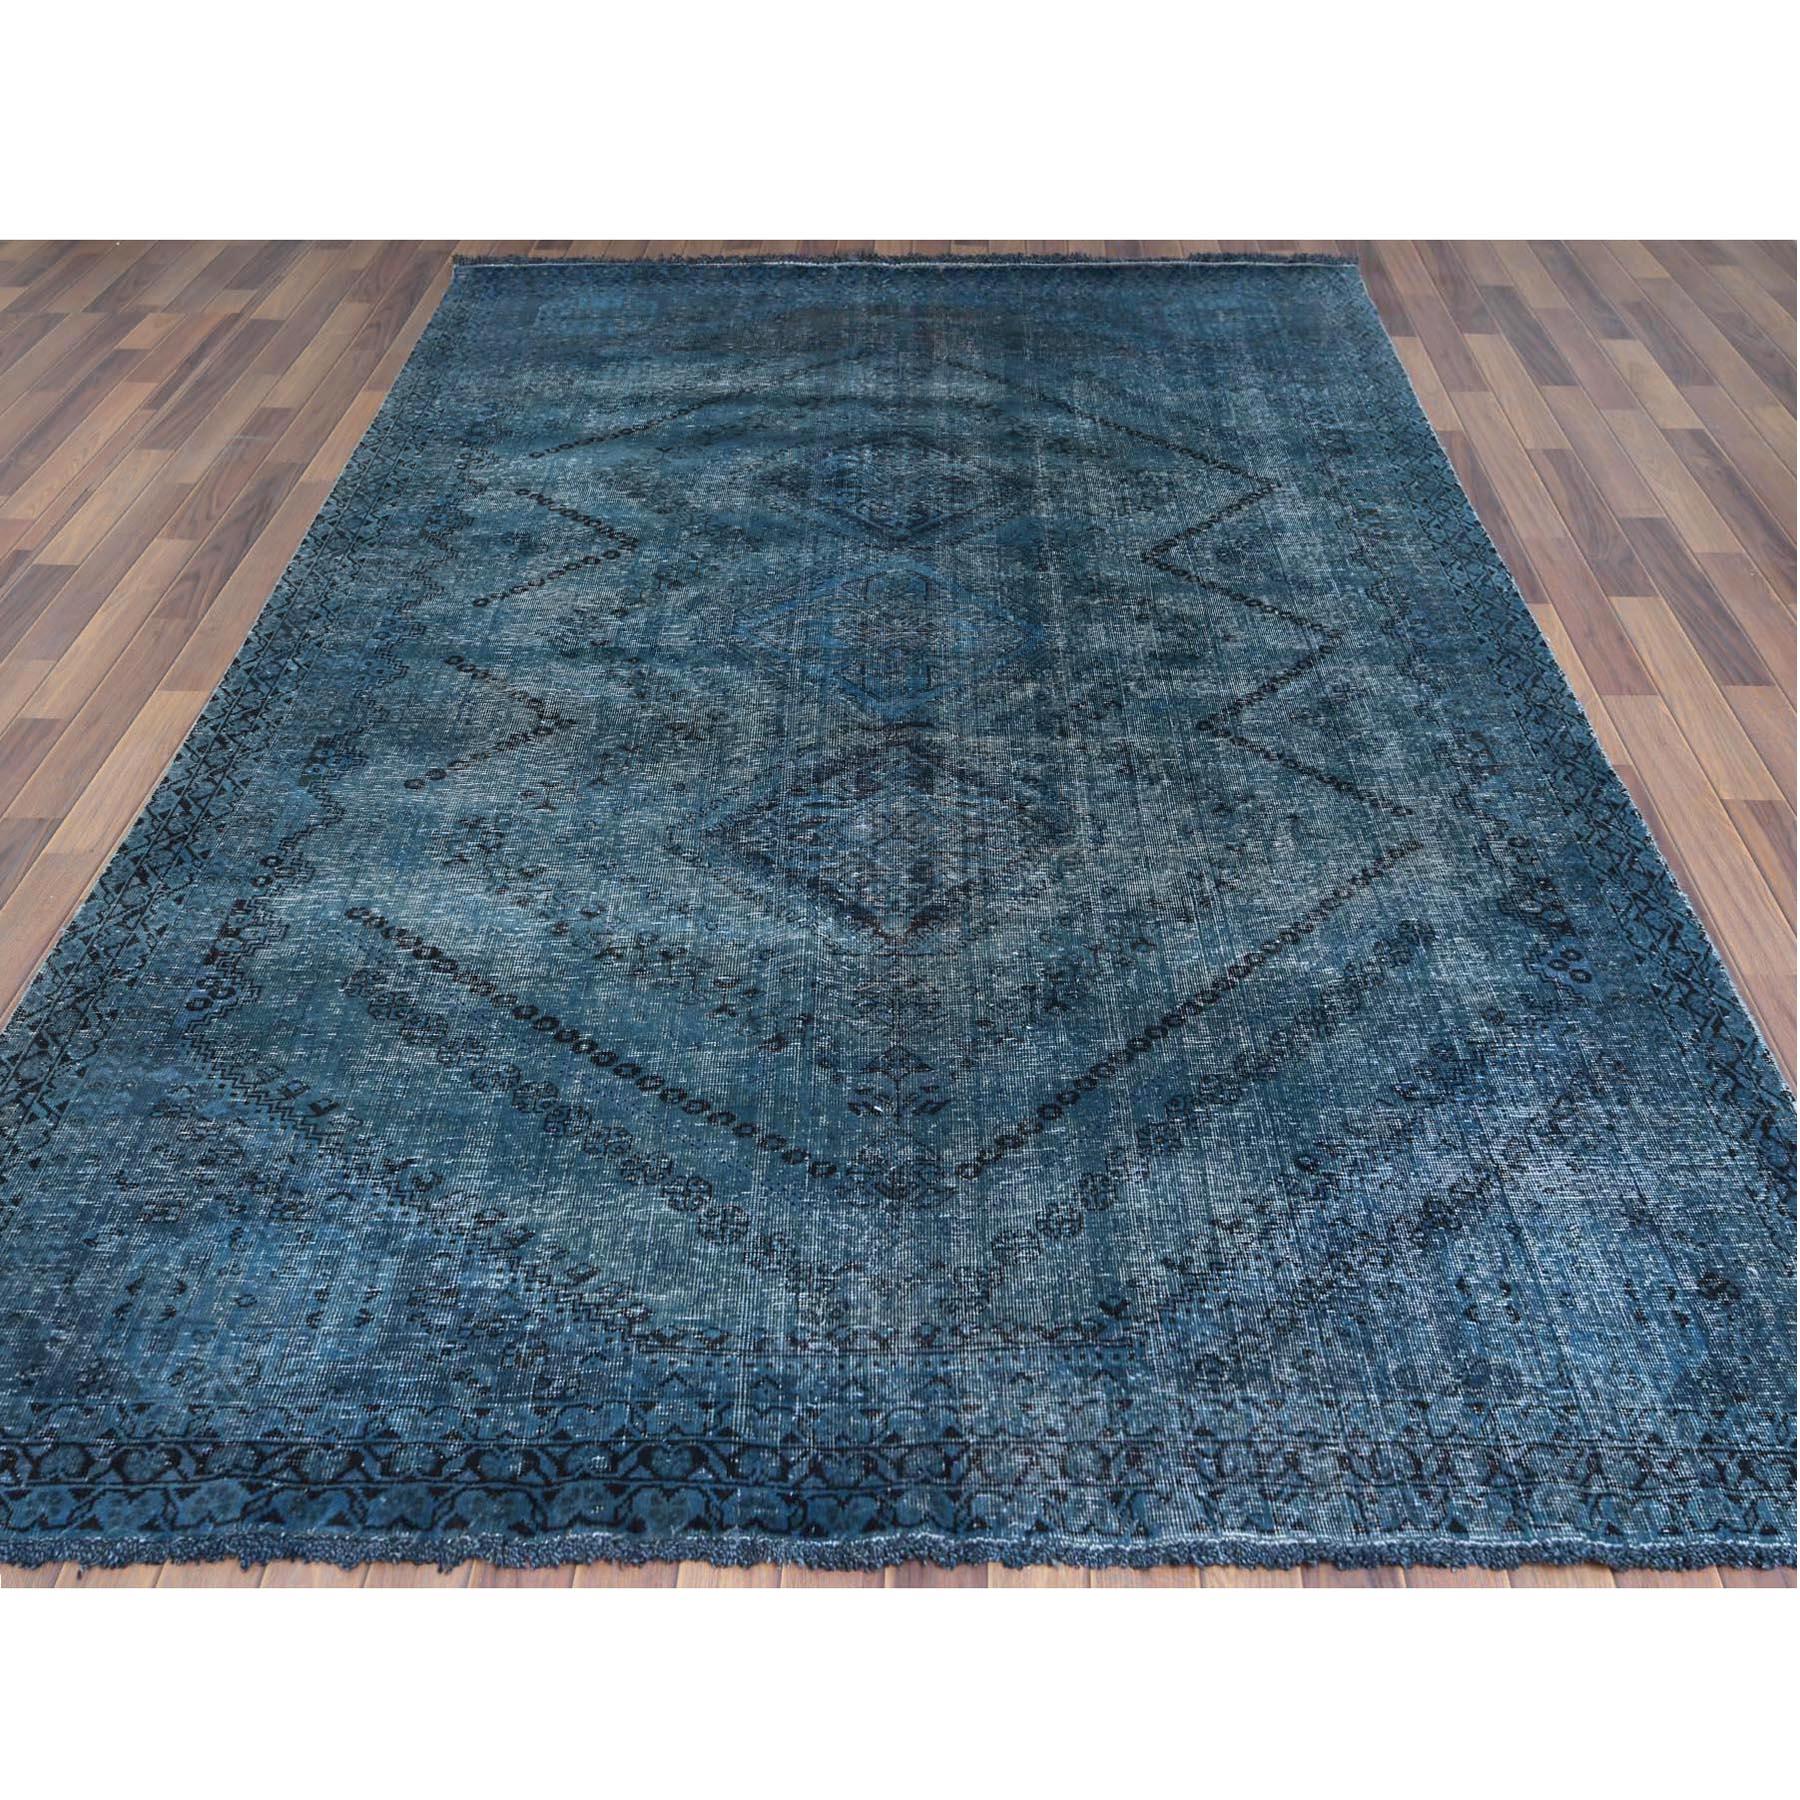 Medieval Teal Persian Shiraz Serrated Medallion Design Old Worn Wool Hand Knotted Rug